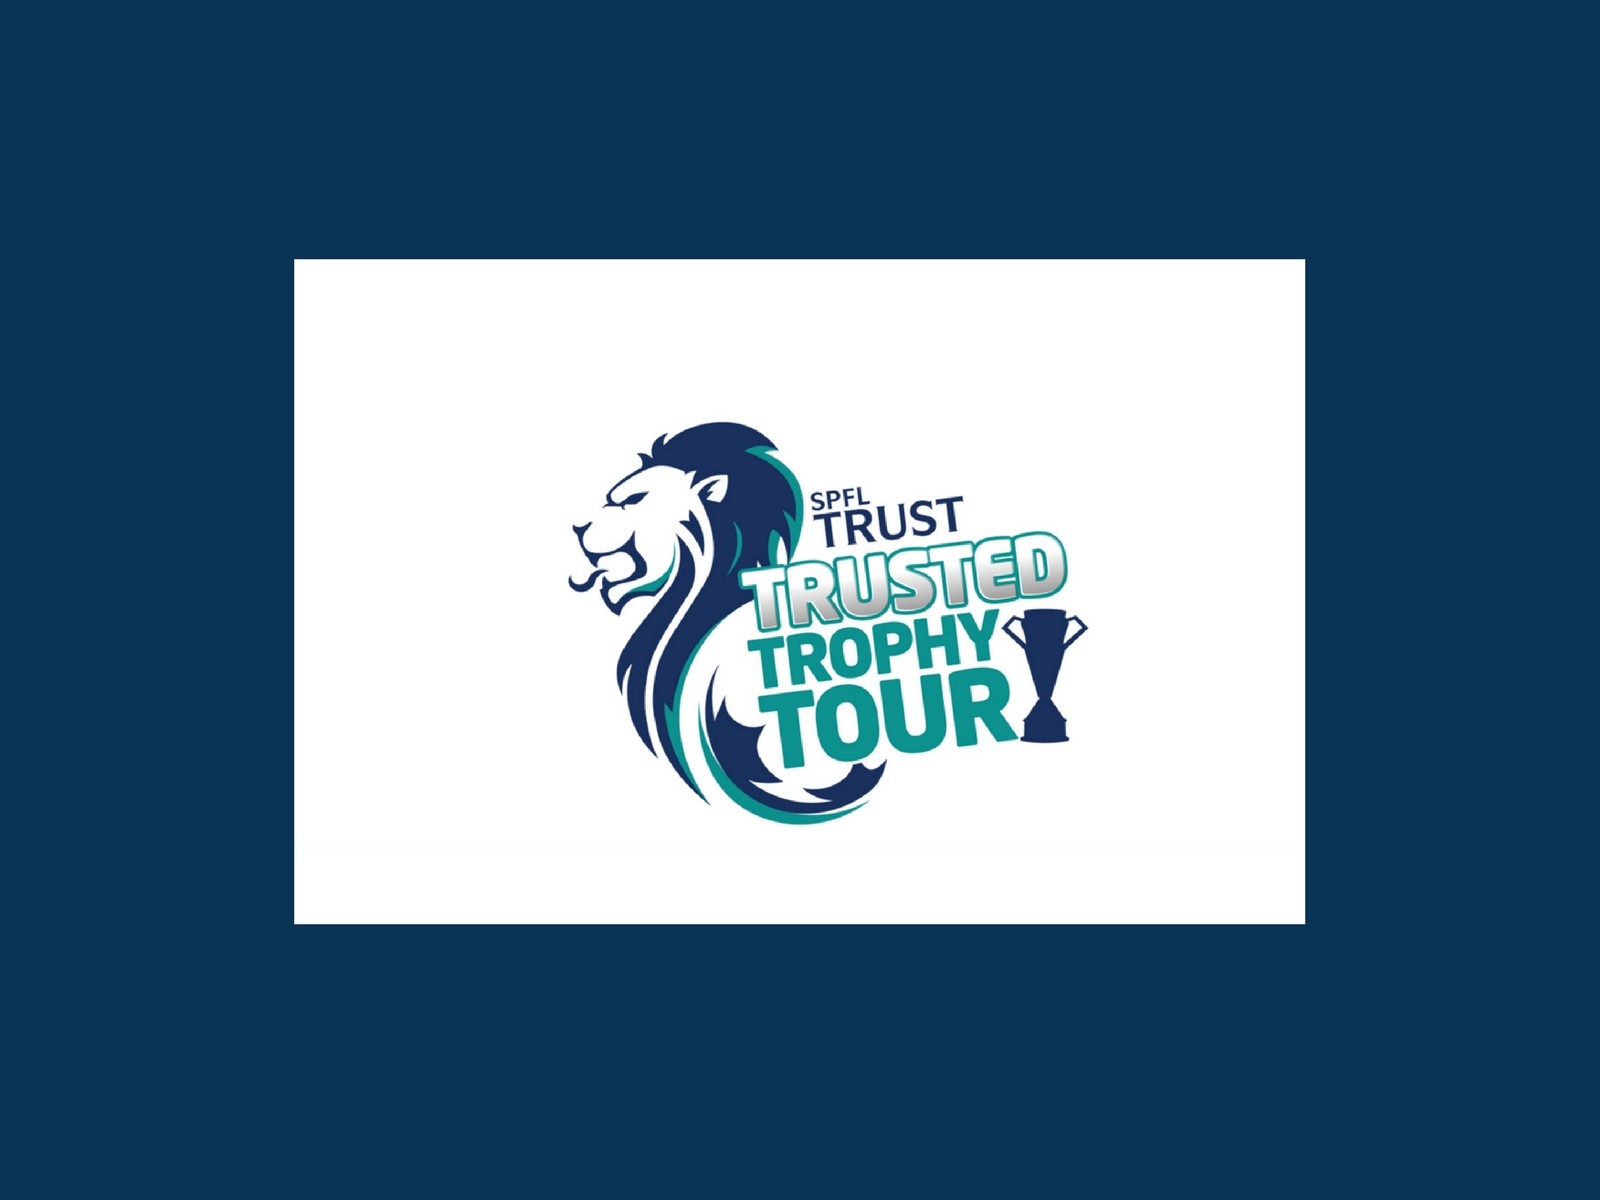  » Big Hearts to open the SPFL Trust “Trusted Trophy Tour”!